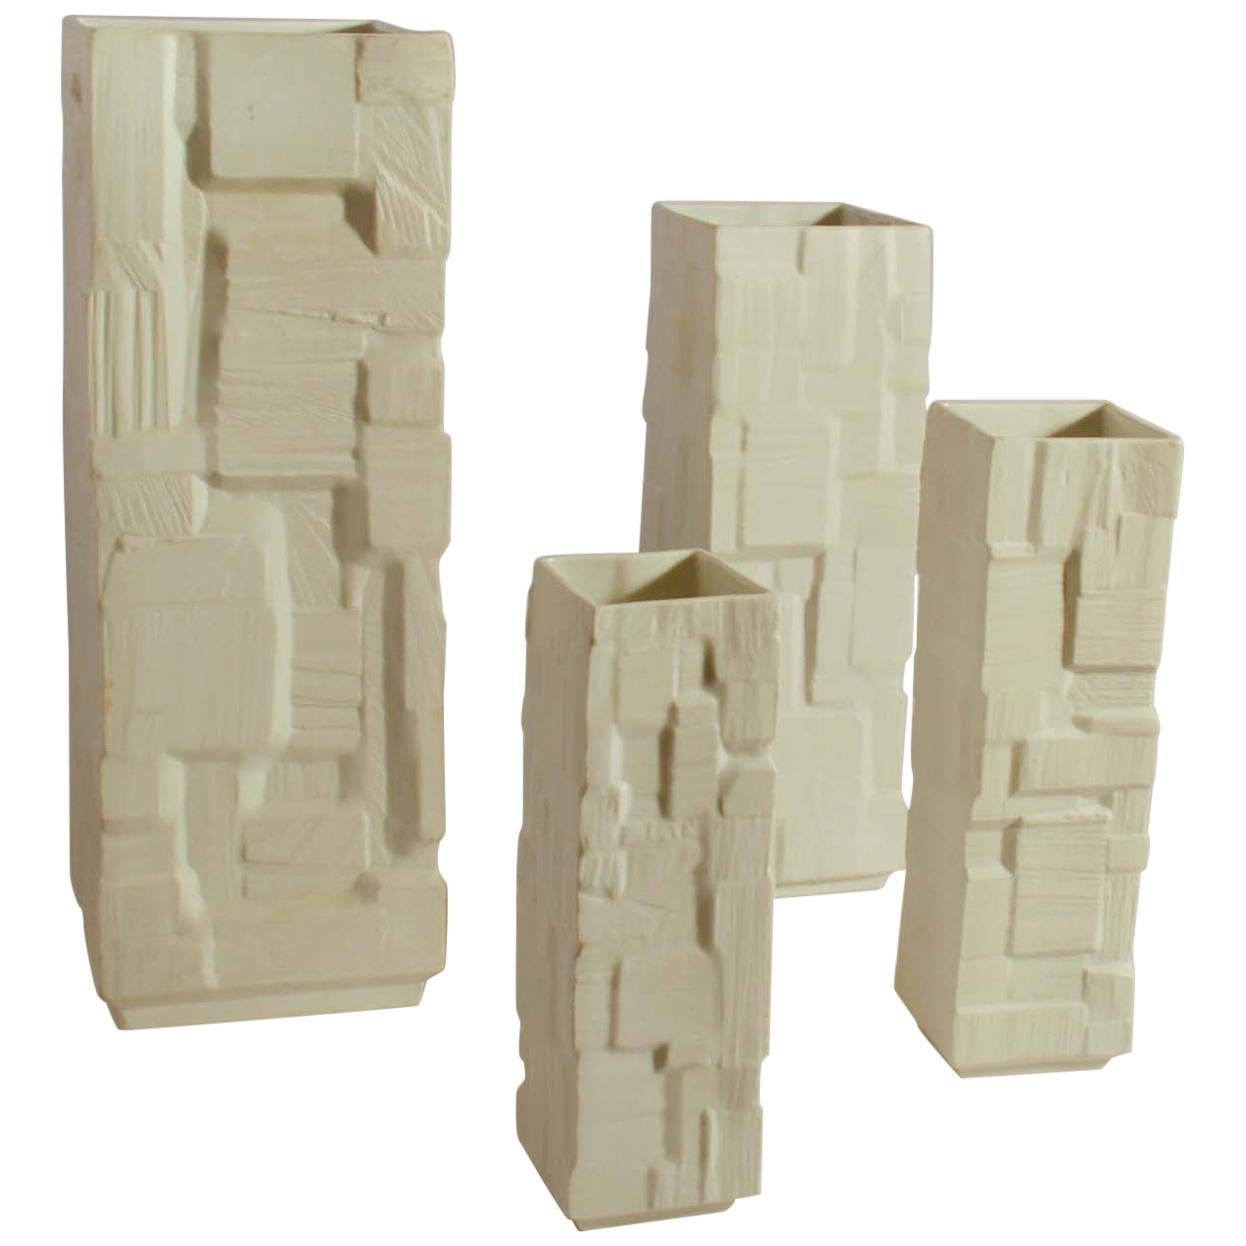 Group of Four Large White Square Relief Vases